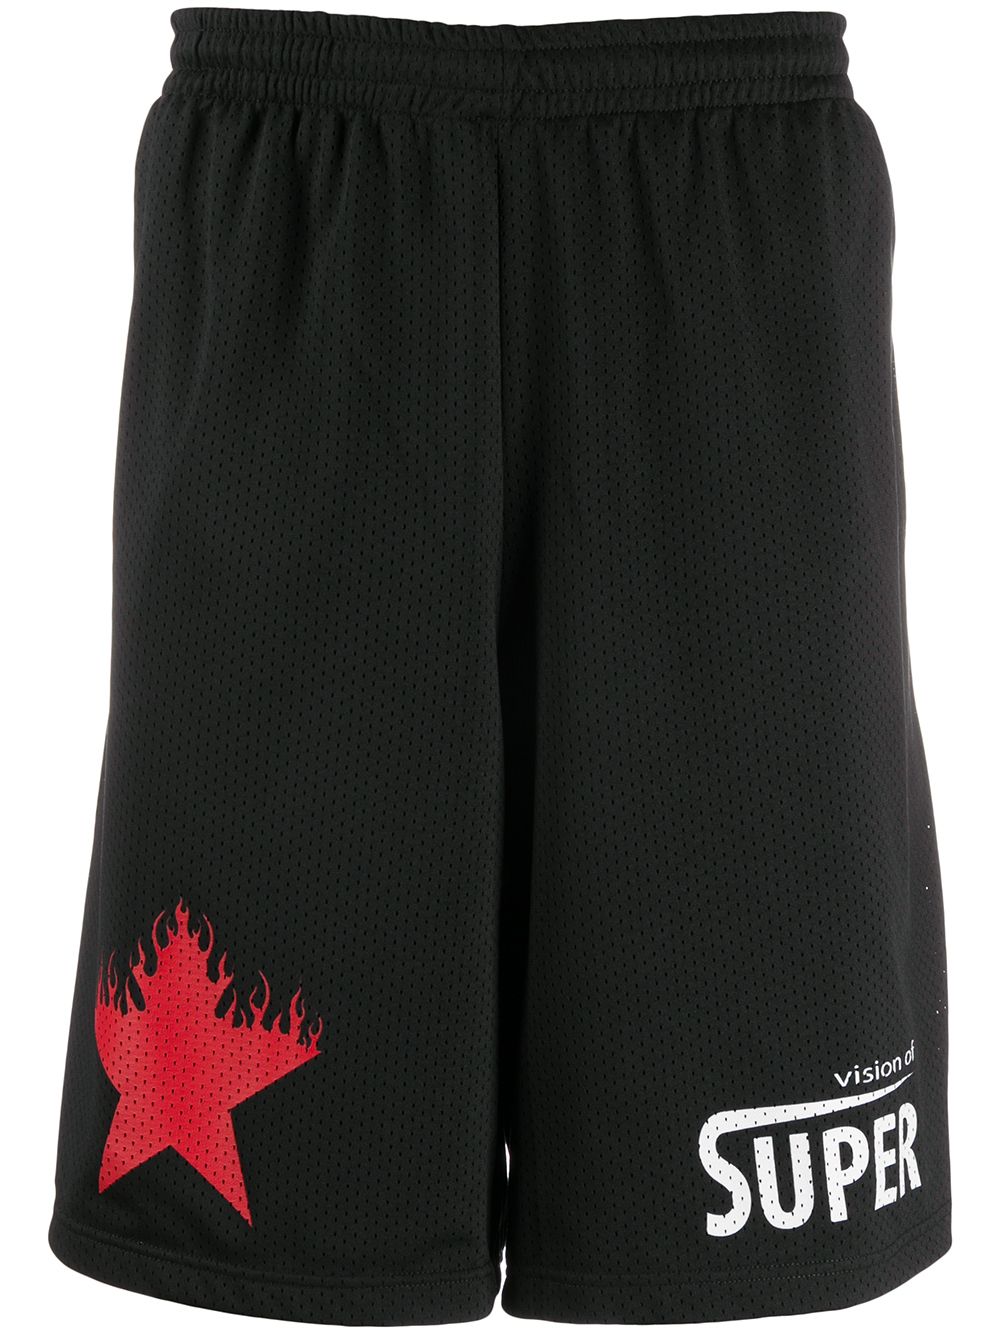 Vision Of Super Fire Star Print Basketball Shorts In Black